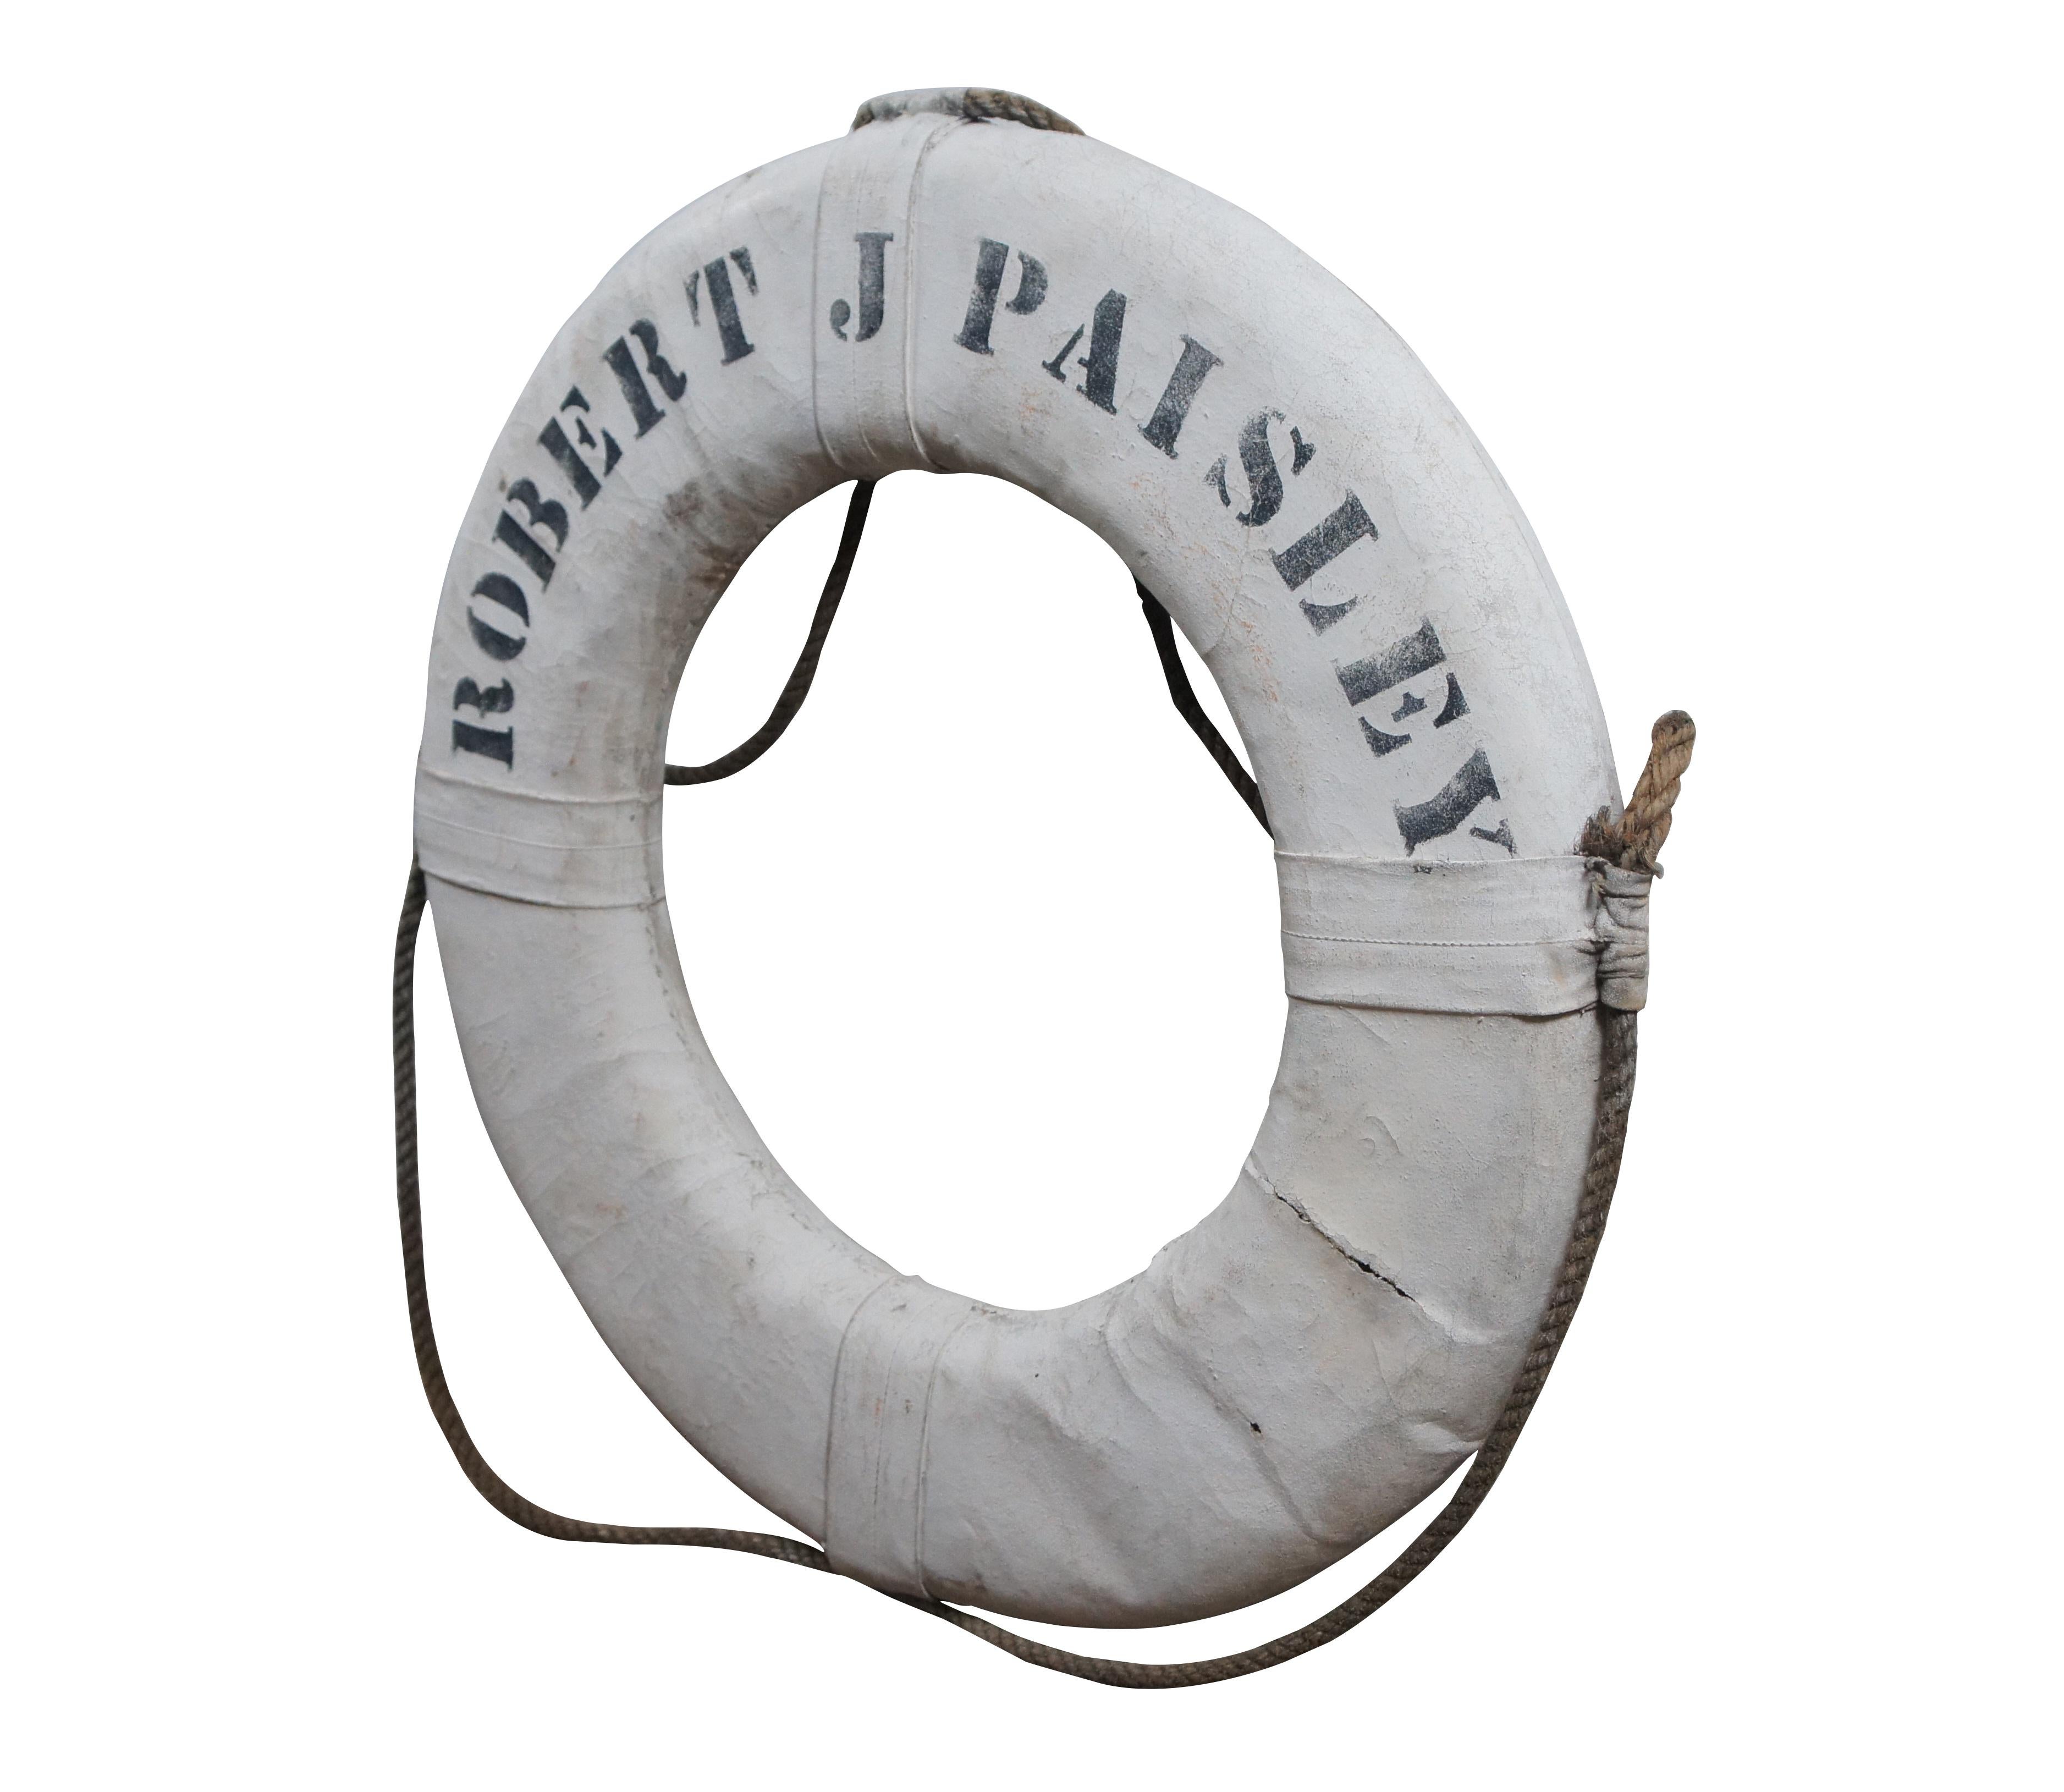 Antique Robert J Paisley Nautical Maritime White Ship Boat Life Preserver Ring 3 In Good Condition For Sale In Dayton, OH